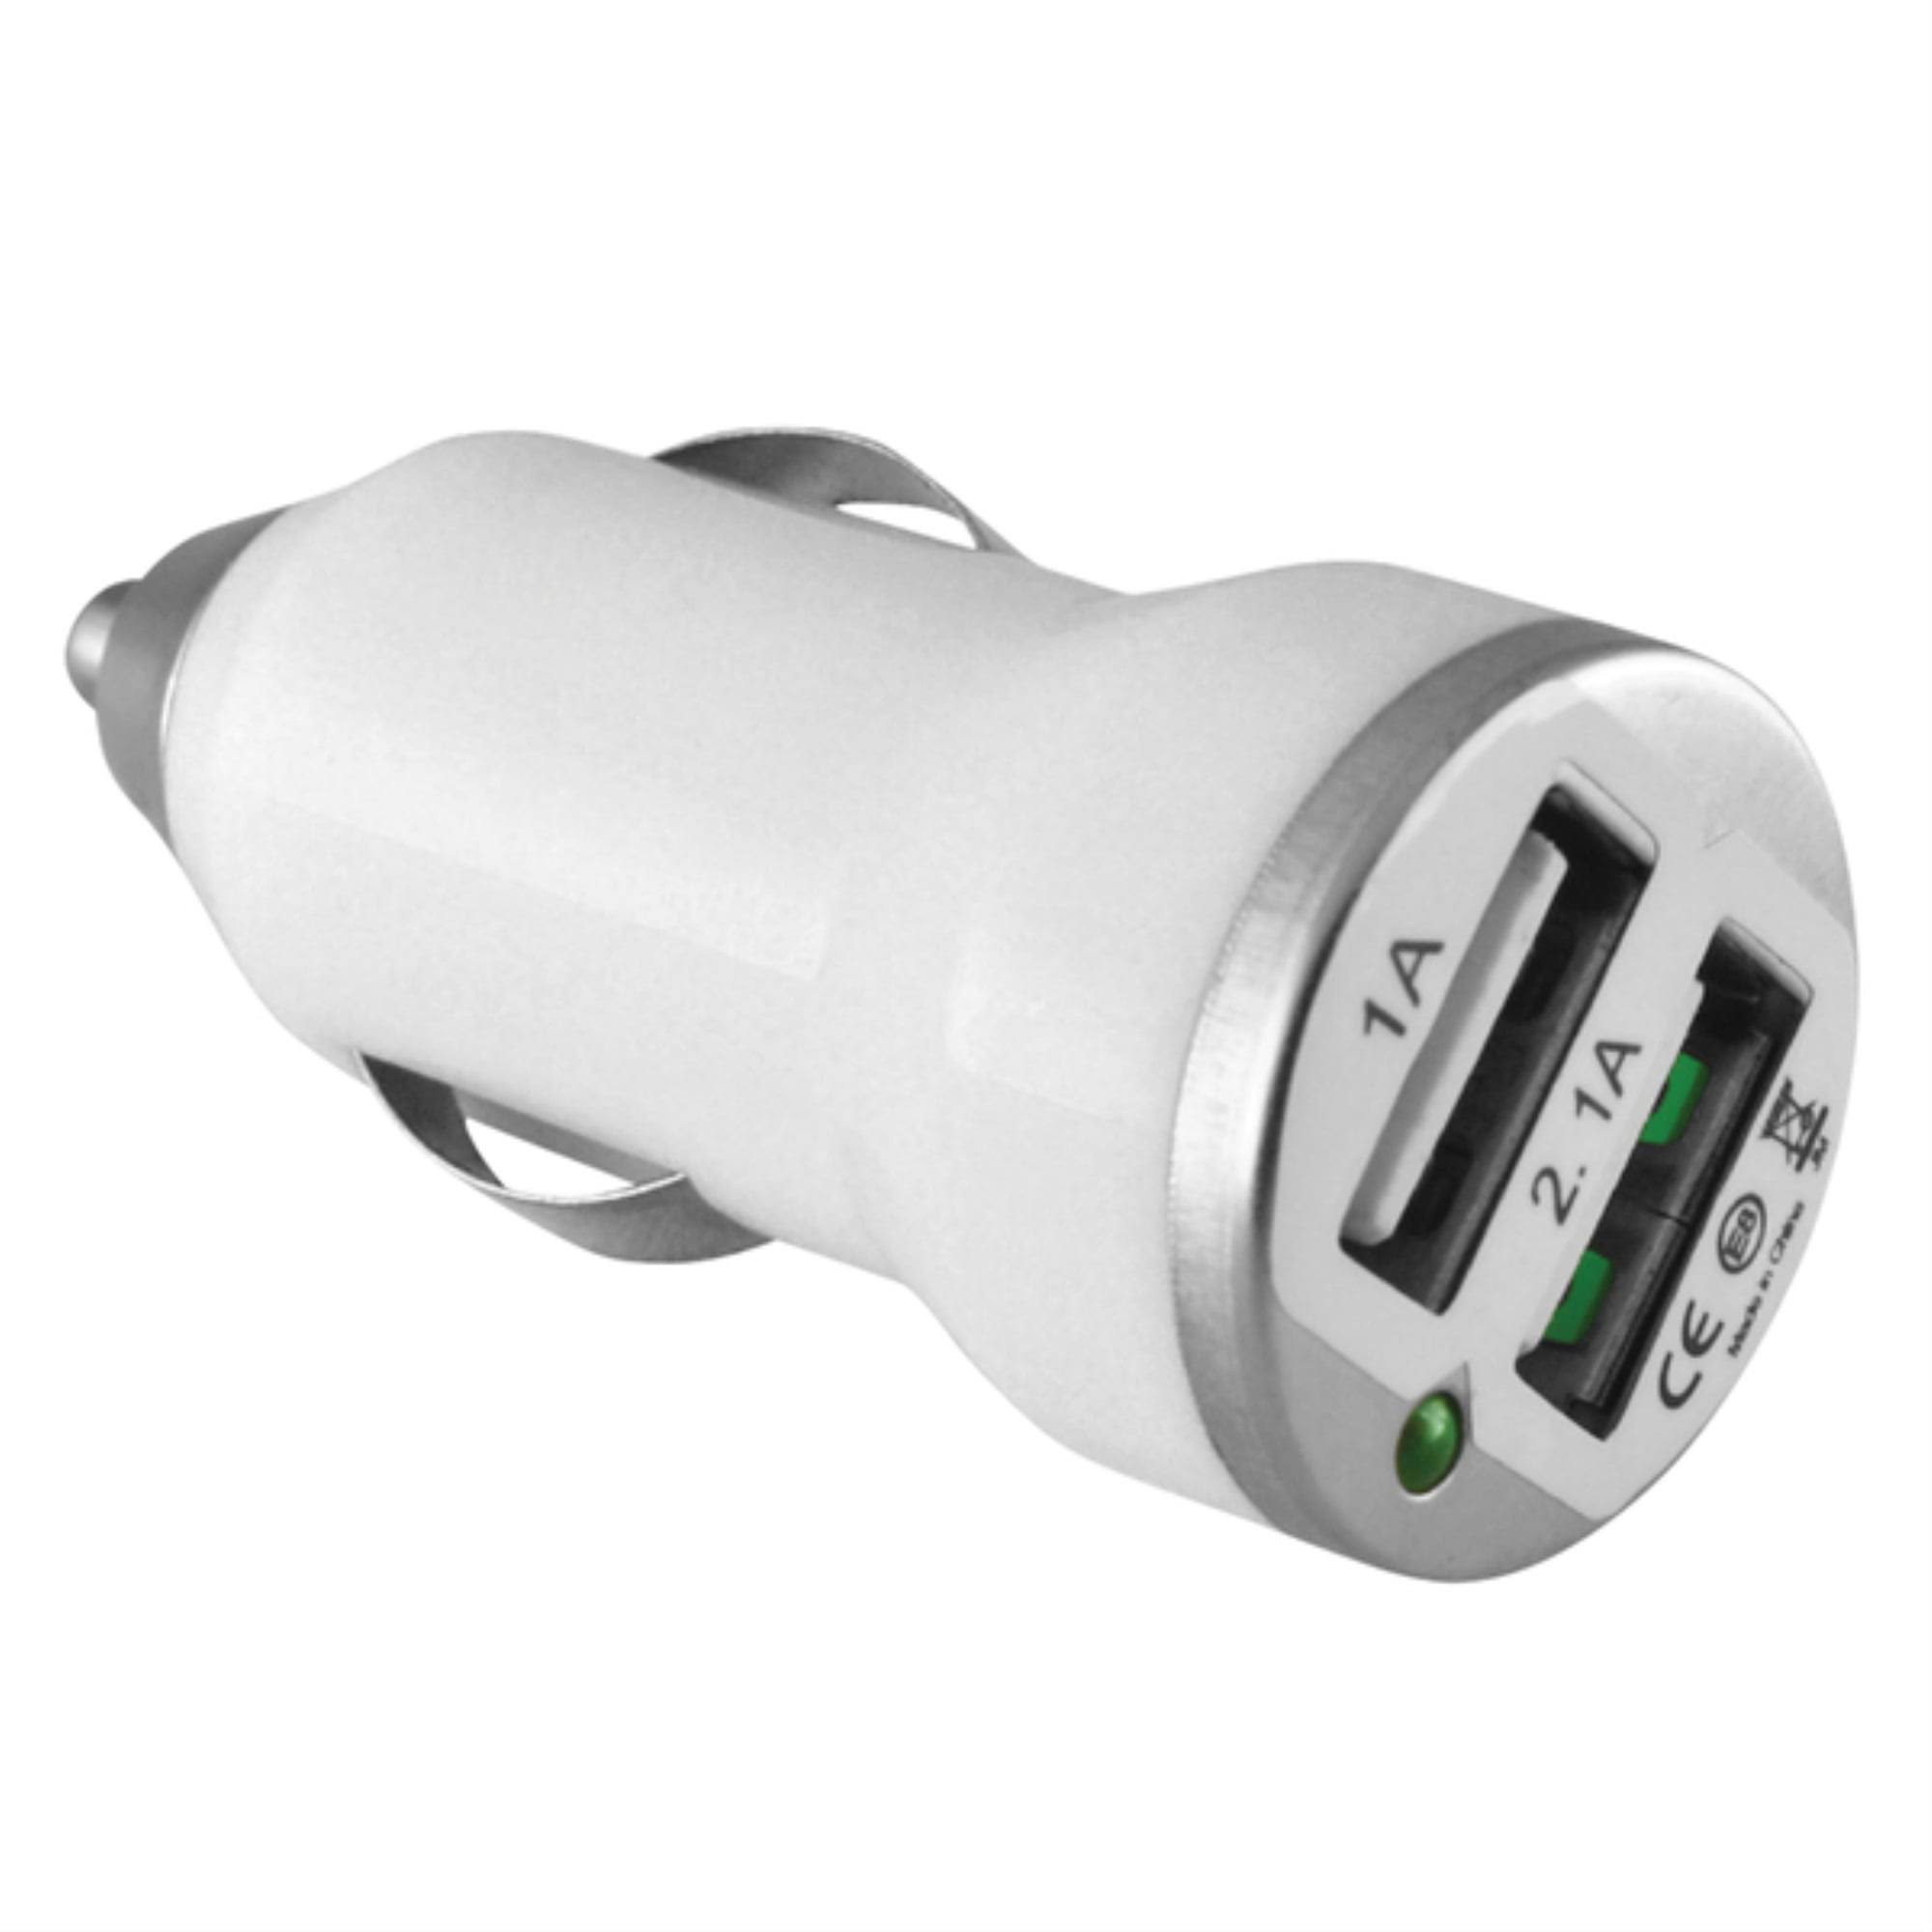 Ematic Ecc08wh 2.1-Amp 2-Port USB-A Car Charger (White)